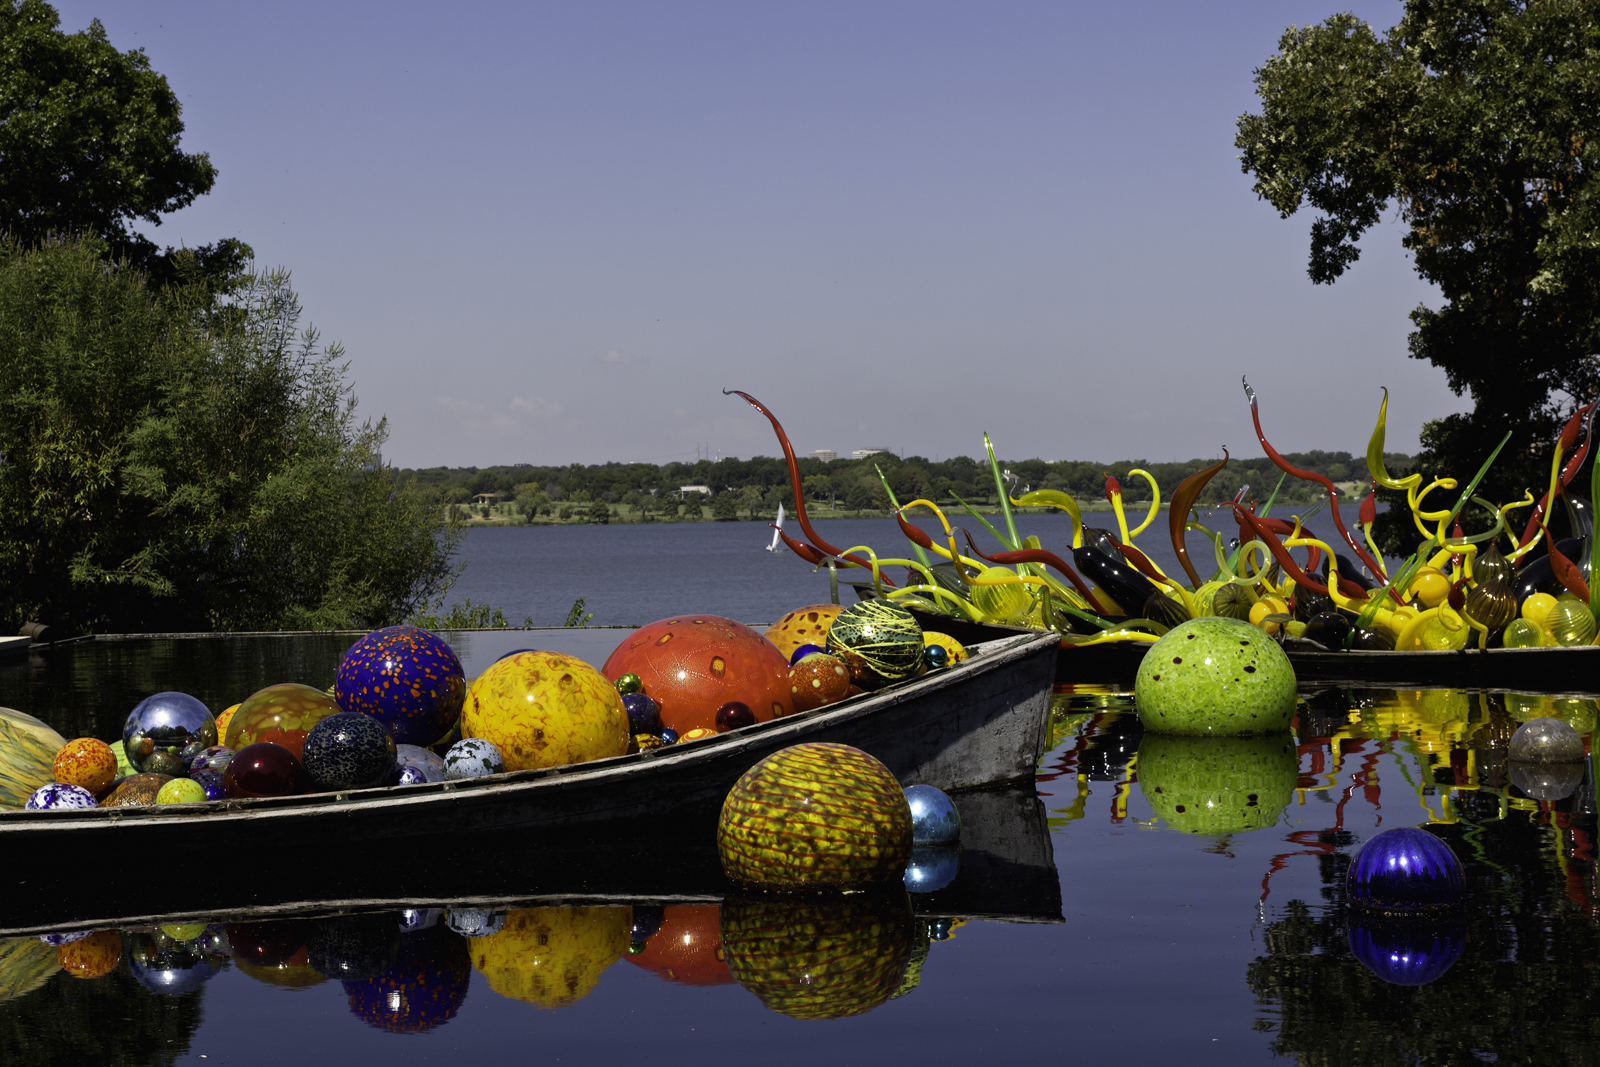 Floating Dallas Arboritum(Chihuly Glass)